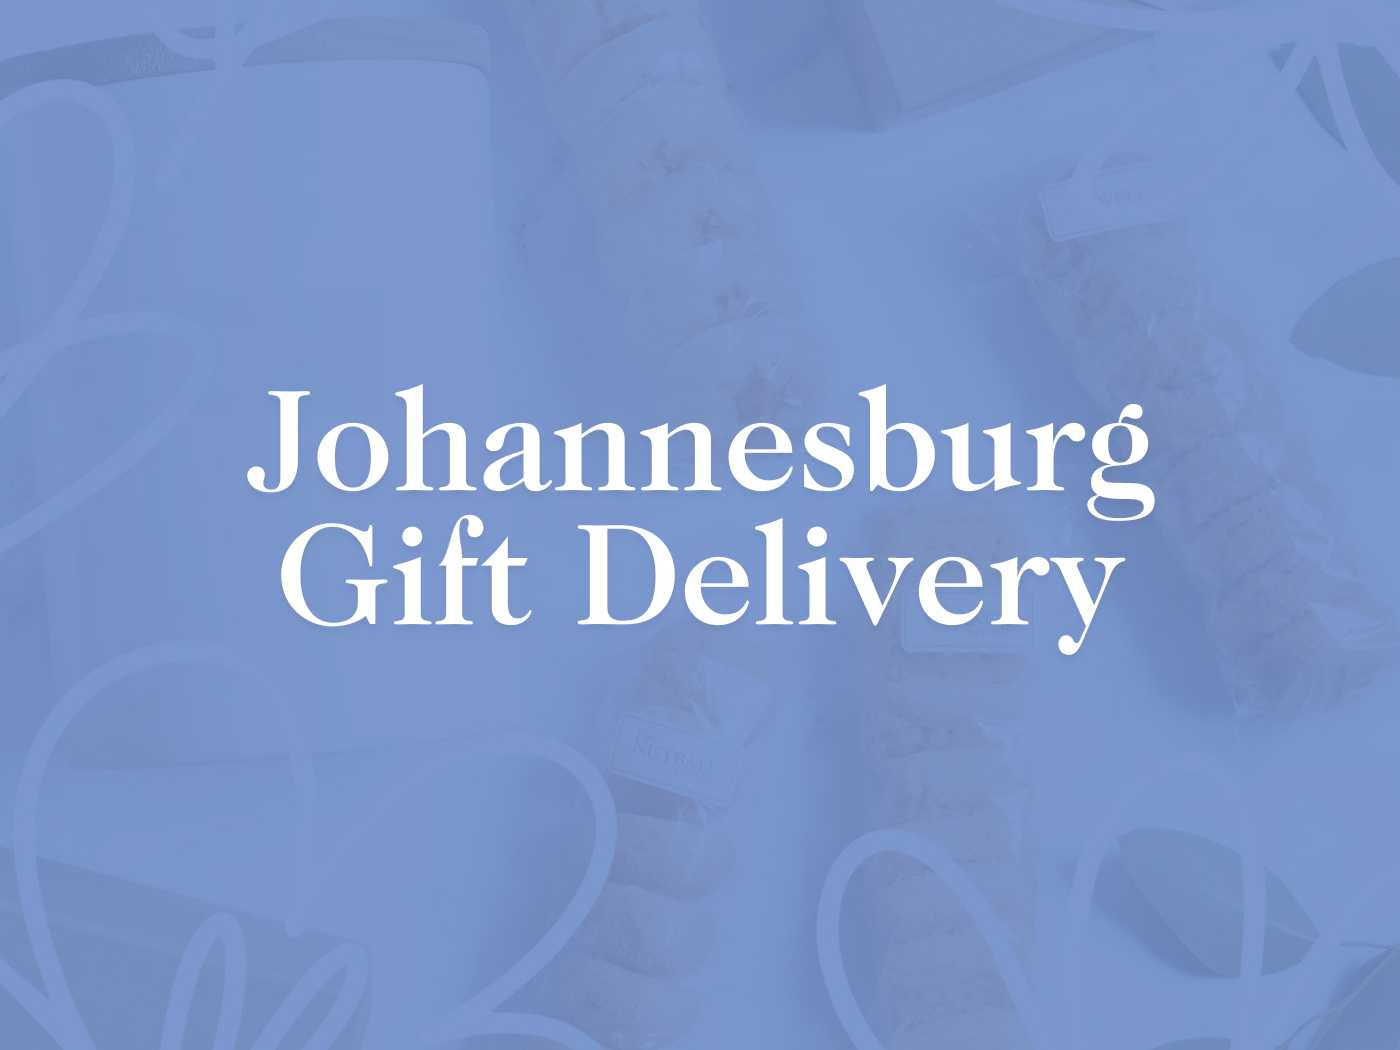 Promotional banner for the Johannesburg Gift Delivery Collection, displaying the text over a background with subtle images of giftboxes and ribbons. Ideal for sending birthday gifts and gift hampers with timely delivery across South Africa. Fabulous Flowers and Gifts.